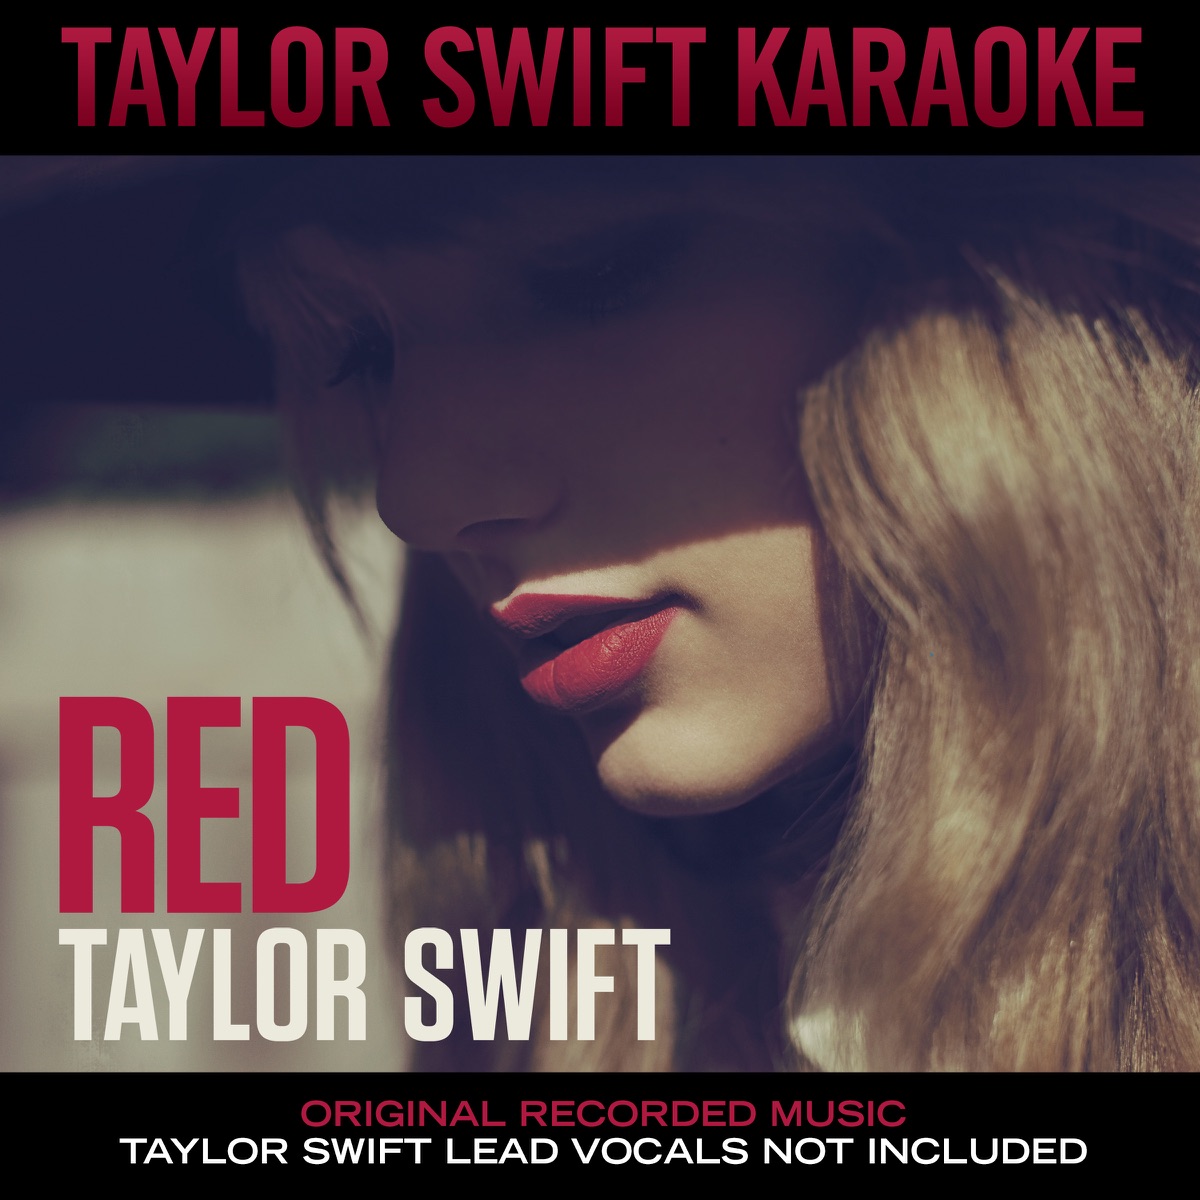 Taylor Swift Karaoke Red Album Cover By Taylor Swift